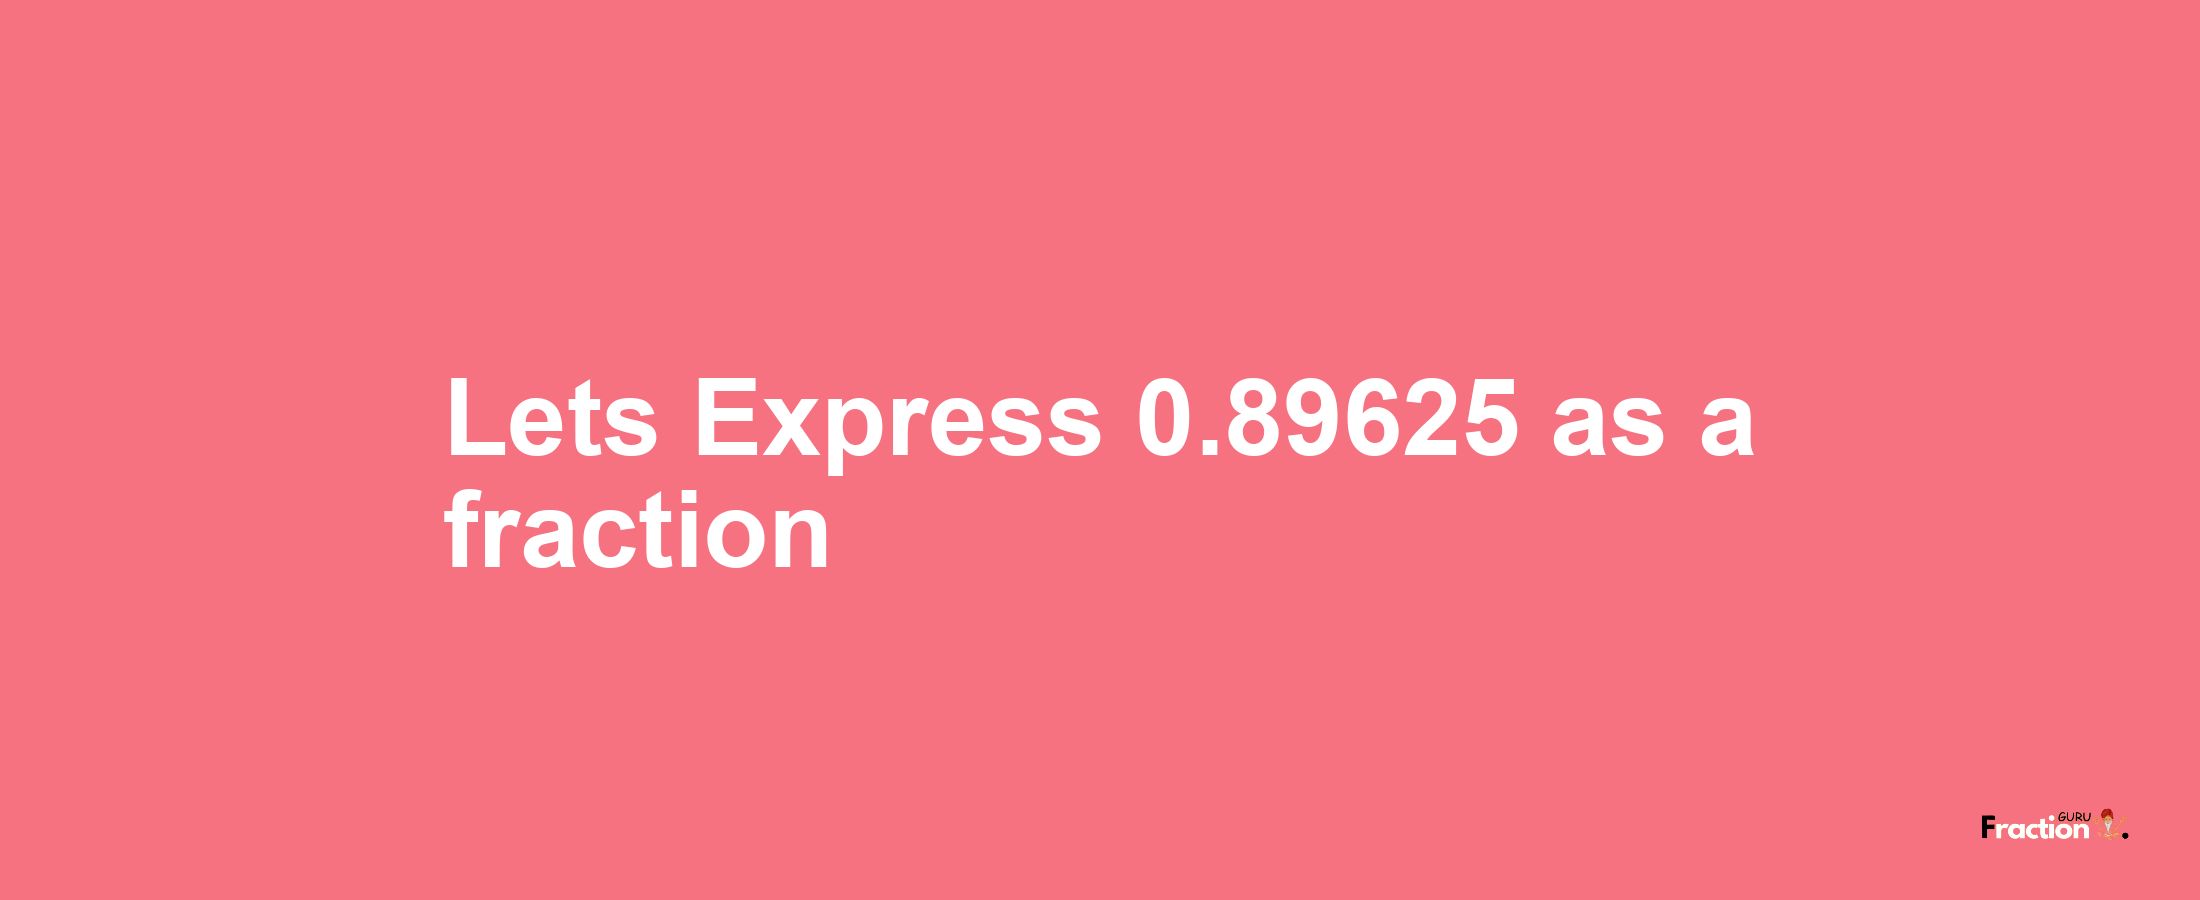 Lets Express 0.89625 as afraction